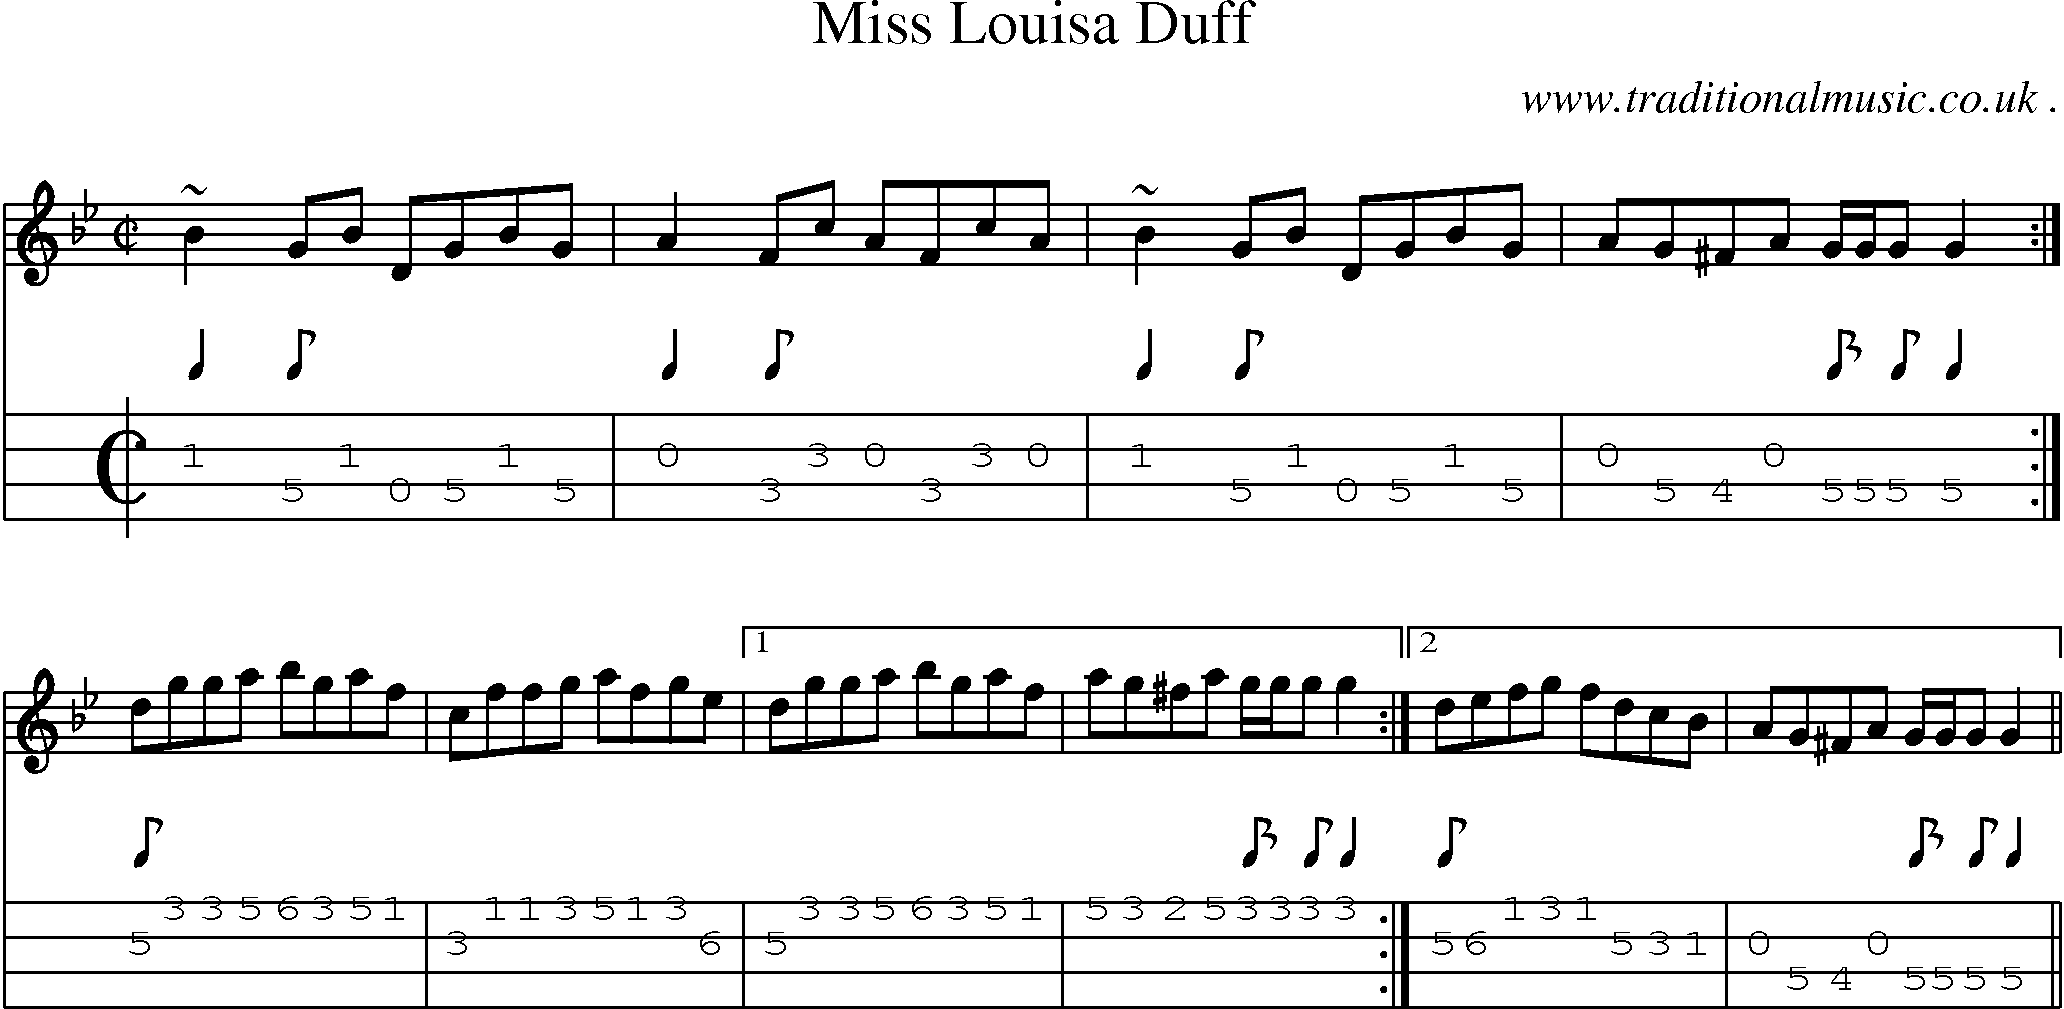 Sheet-music  score, Chords and Mandolin Tabs for Miss Louisa Duff